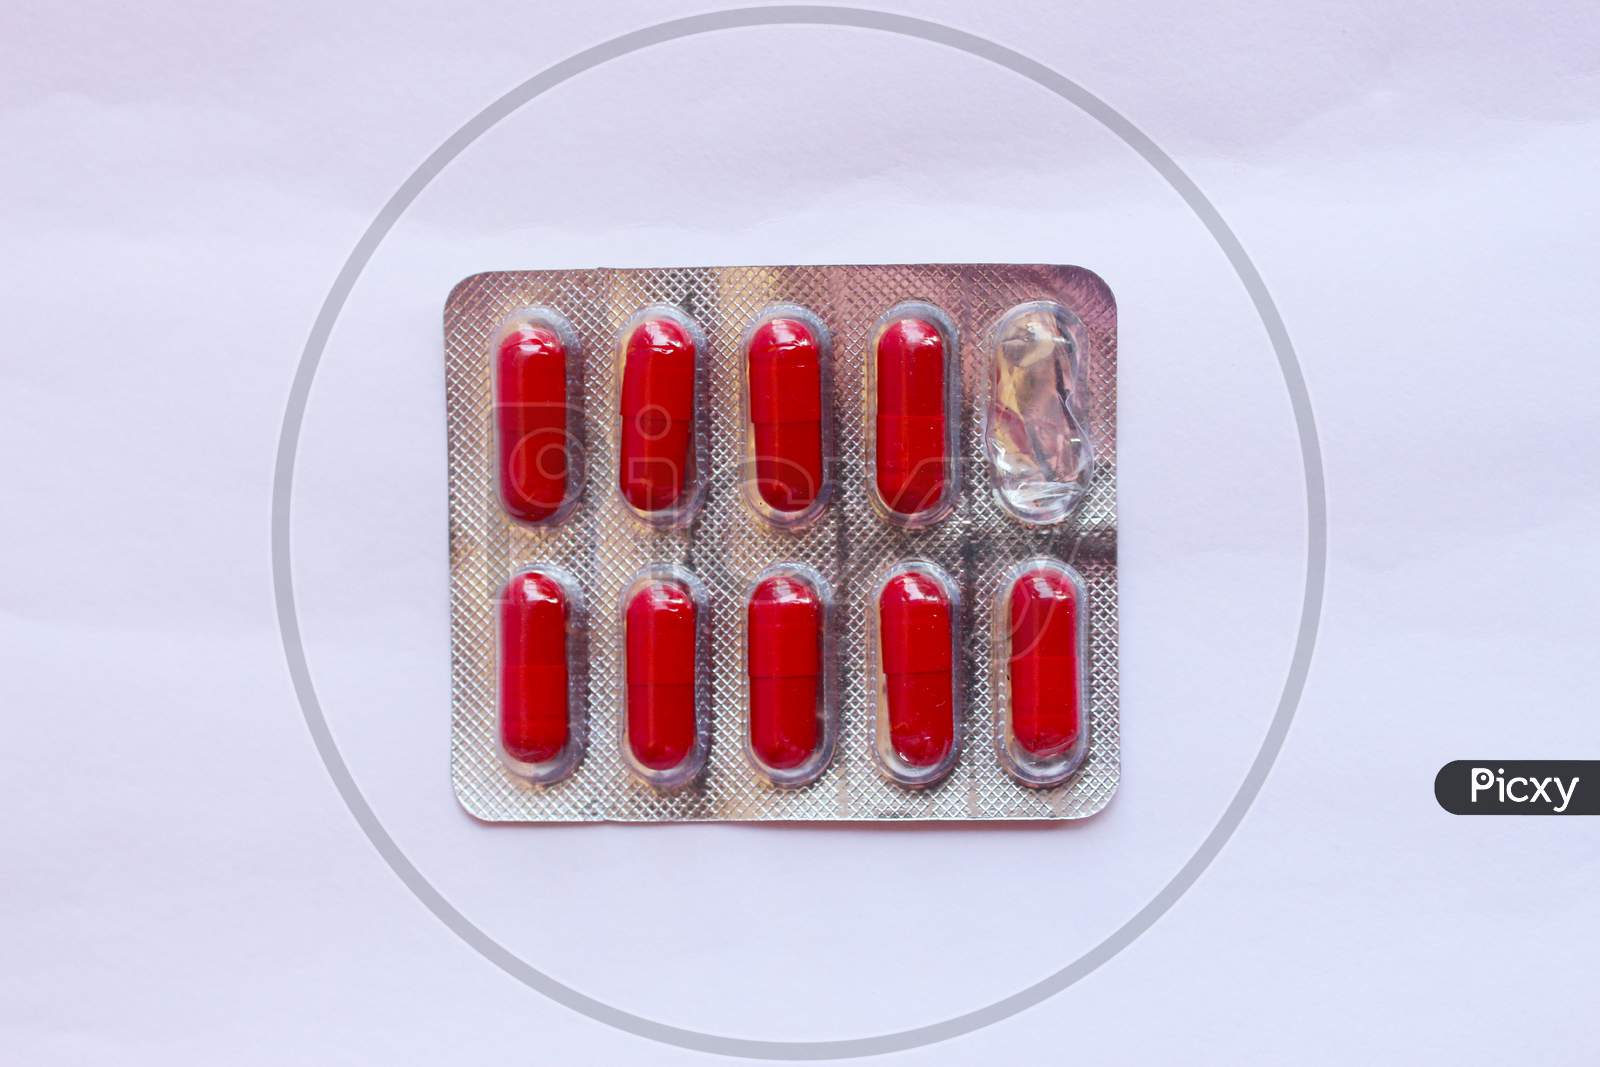 Blister Pack With Pharmaceutical Drug In The Form Of Red Capsules With One Used Capsule On A Light Colored Table, Top View